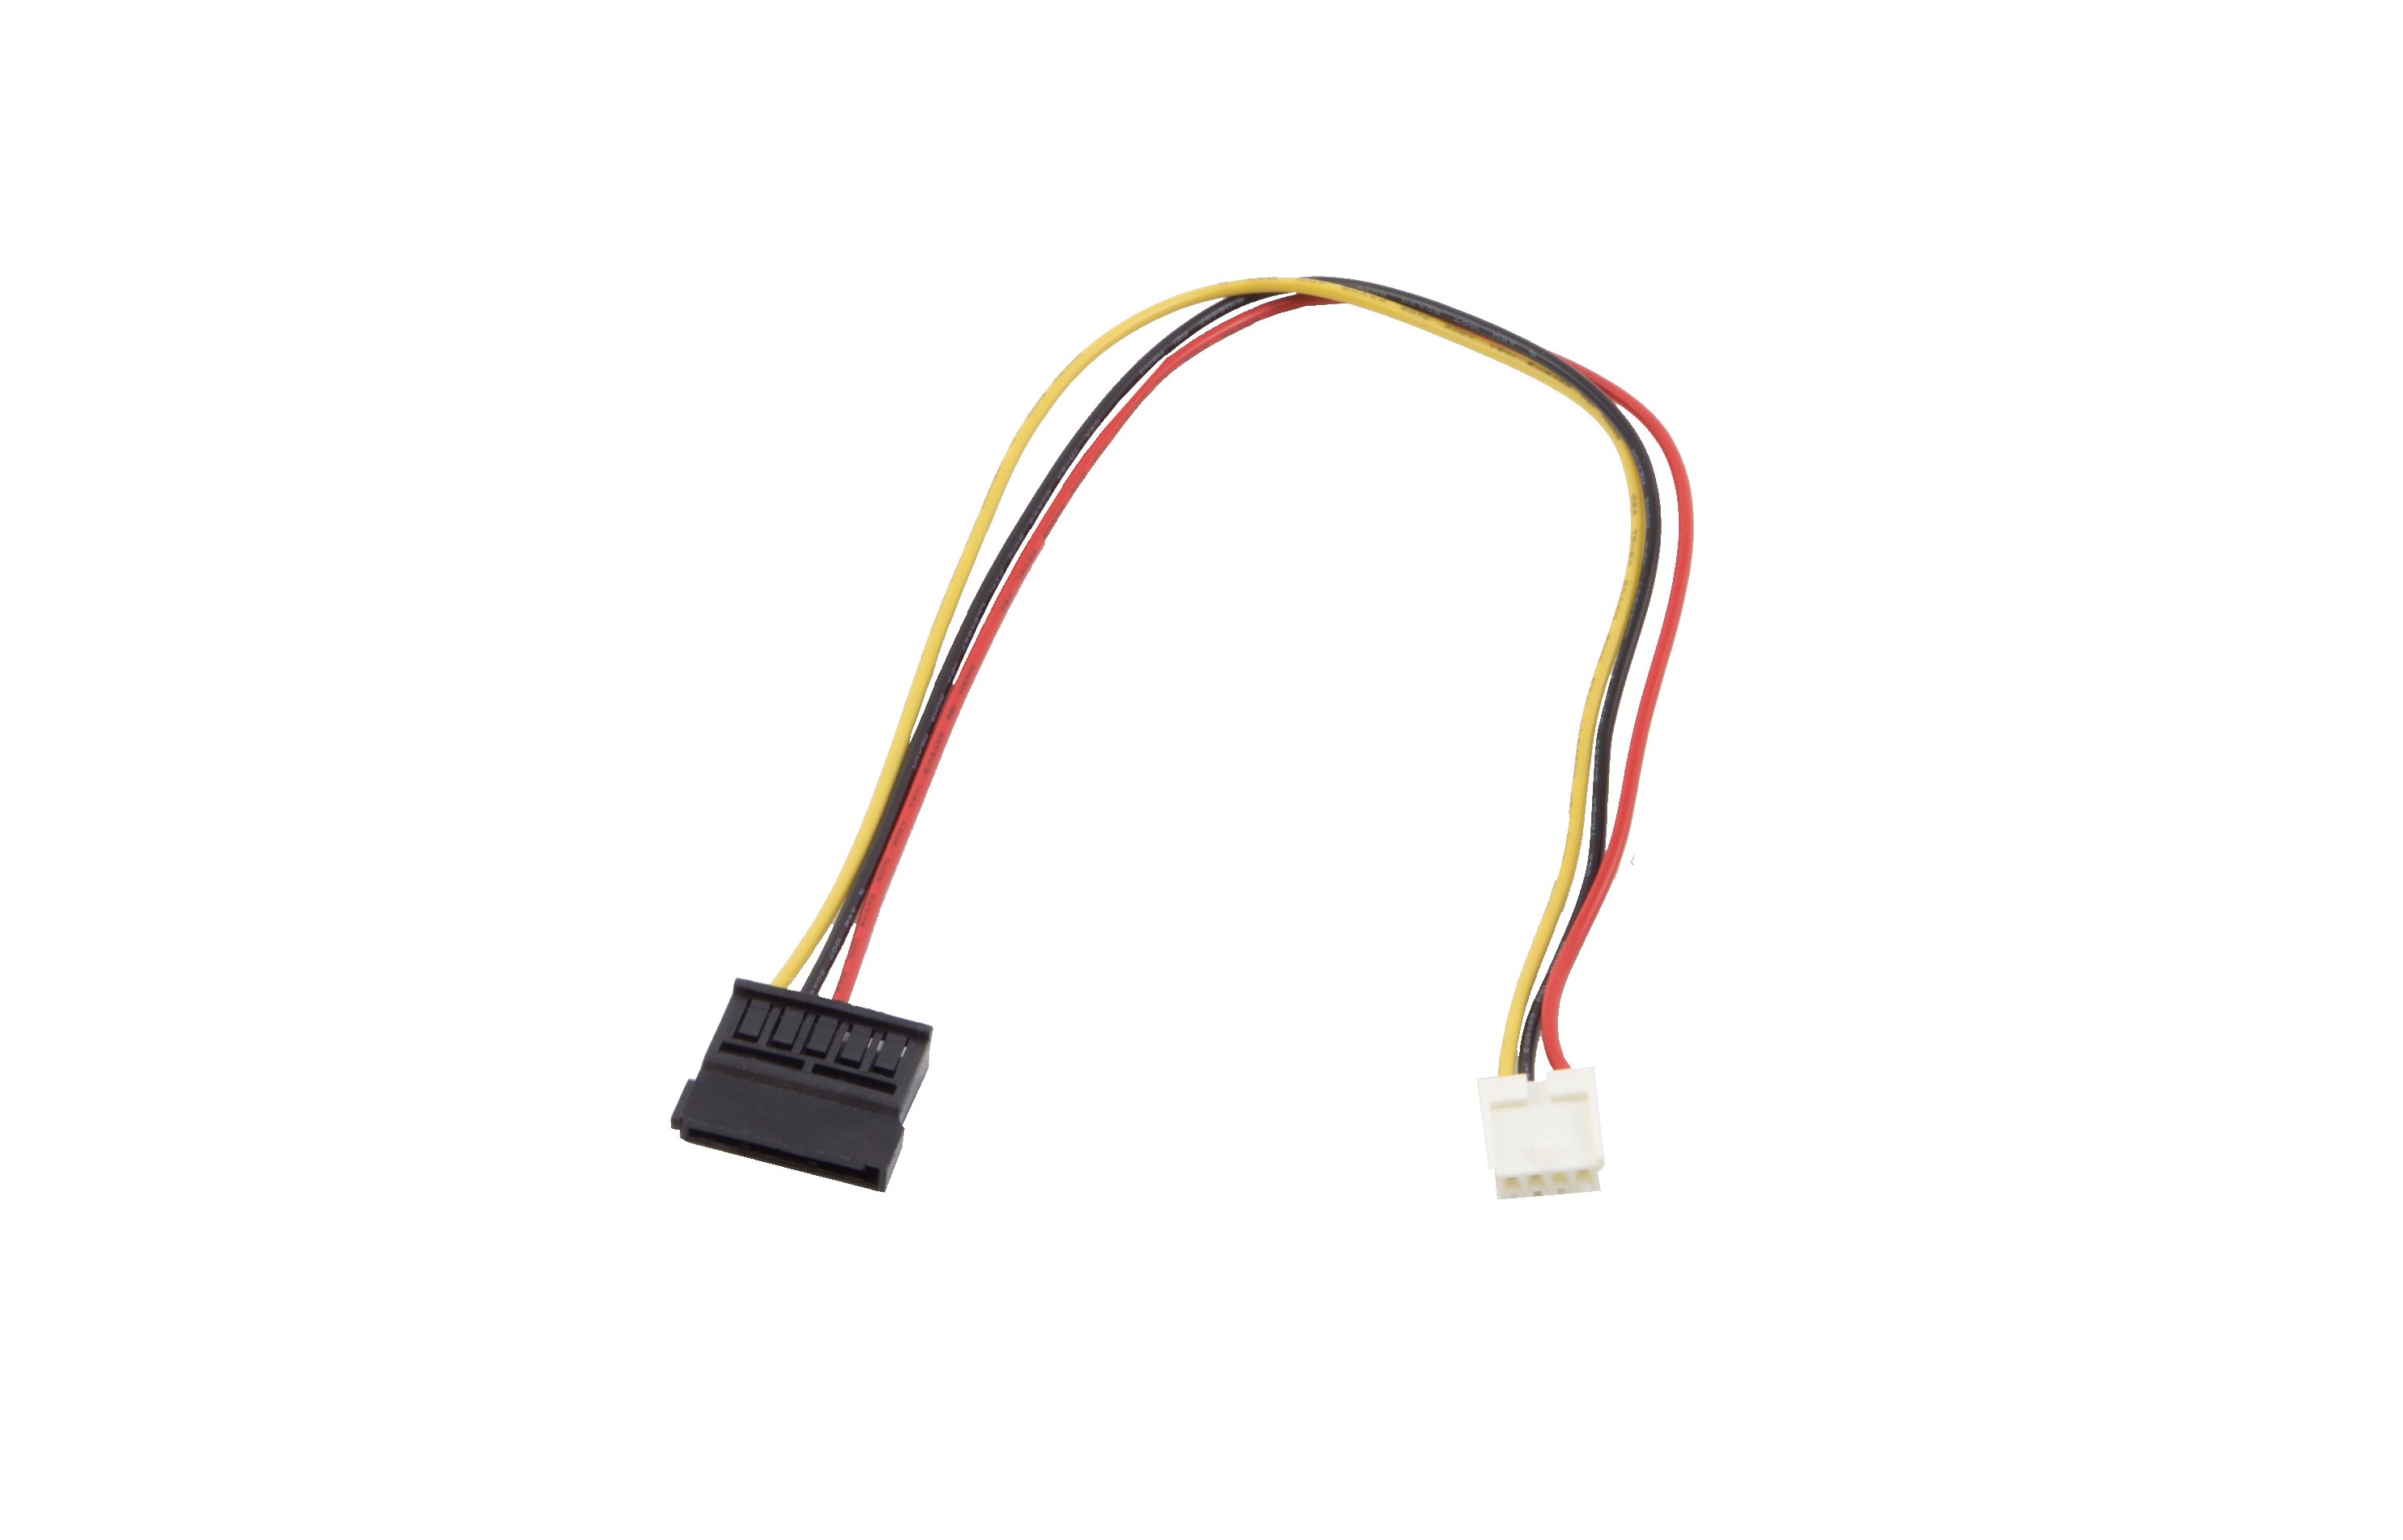 SATA POWER CABLE  |Products|Accessories|Cable & Cord